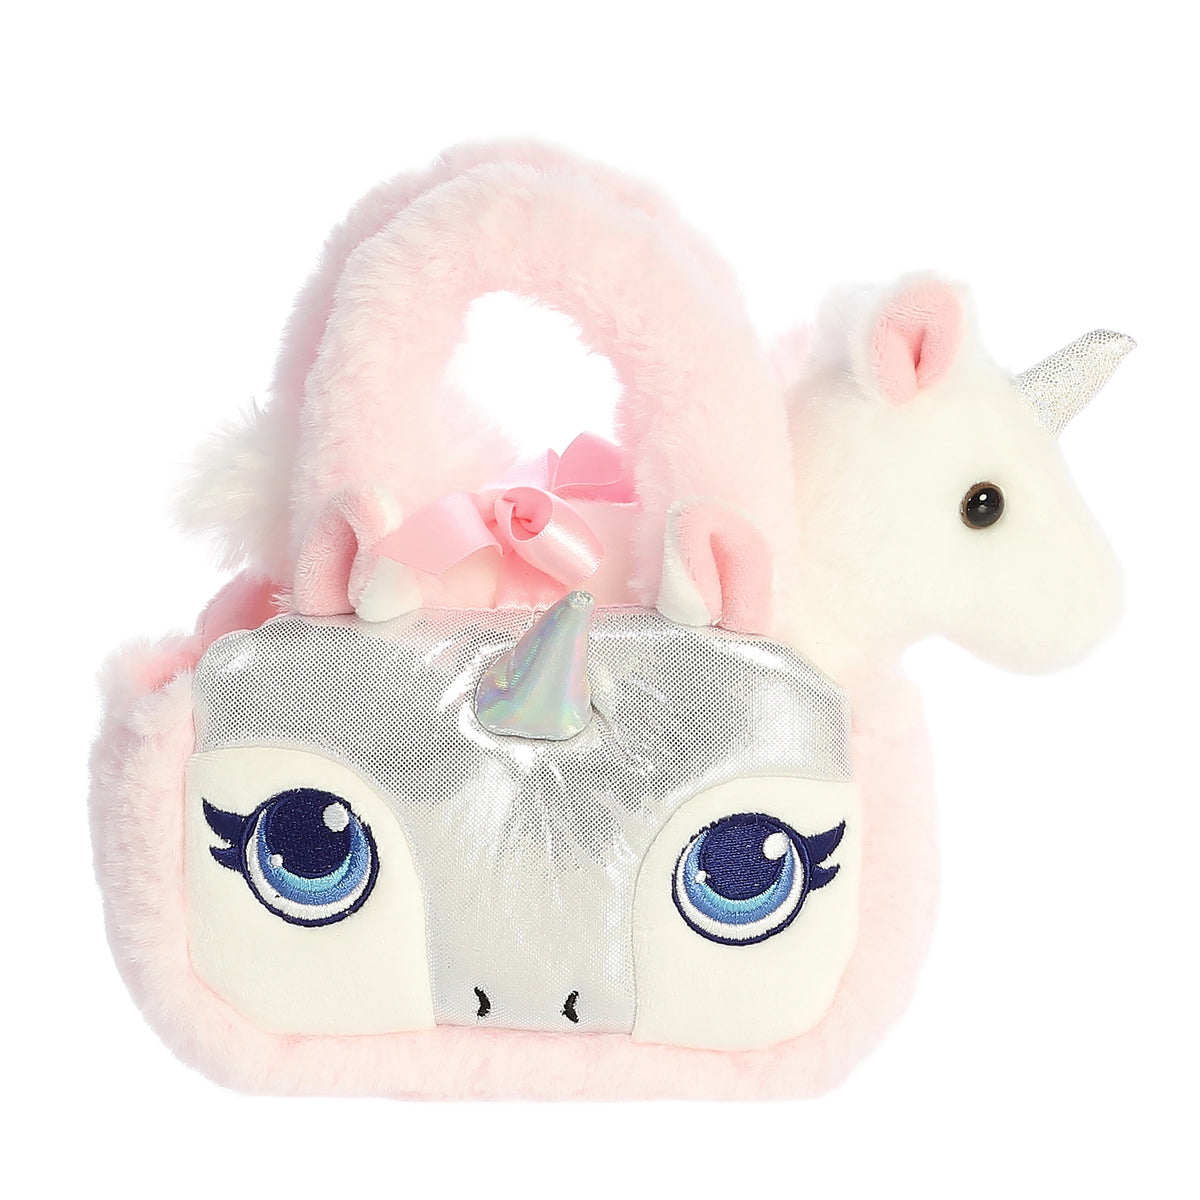 Soft pink Glitter Unicorn plush carrier from Aurora with a unicorn stuffed animal companion, ready to spark magical moments.